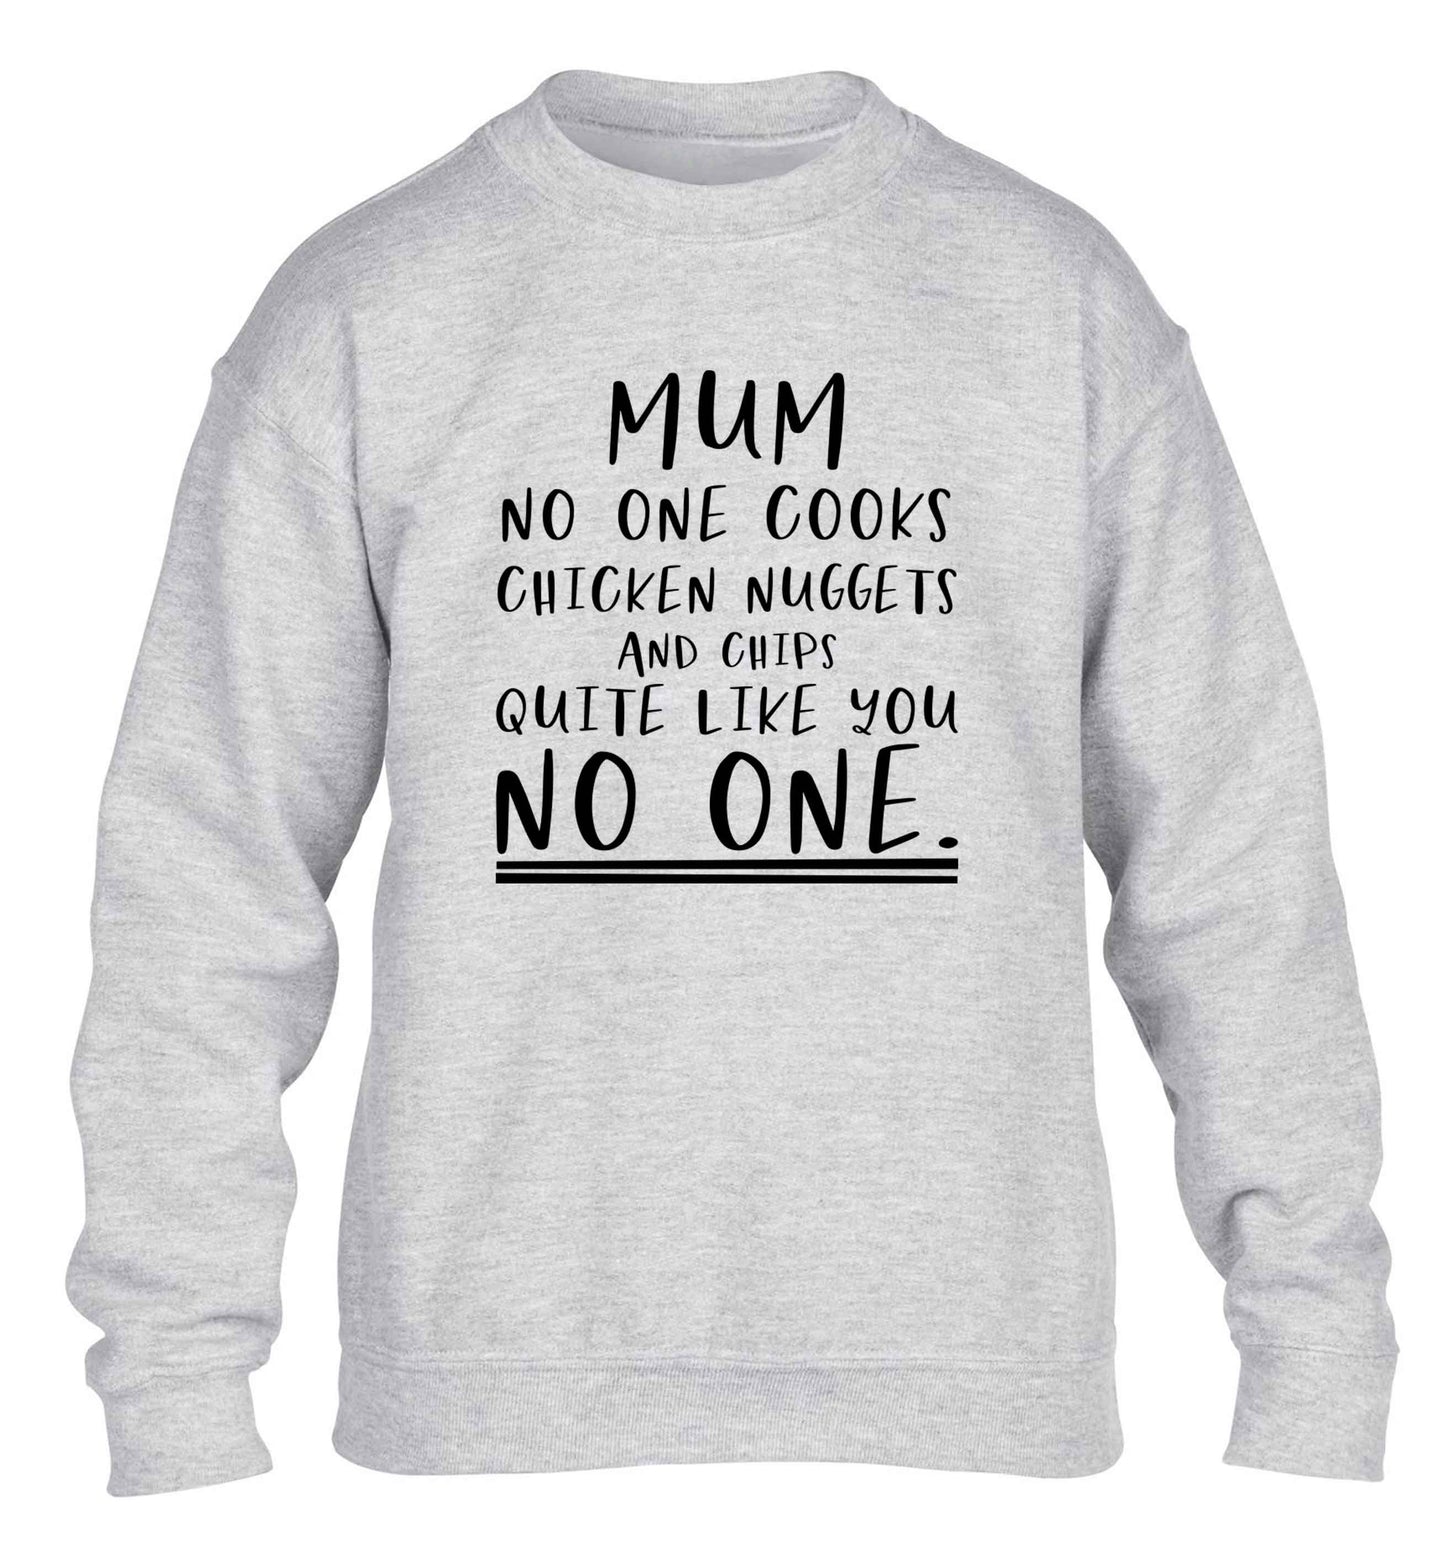 Super funny sassy gift for mother's day or birthday!  Mum no one cooks chicken nuggets and chips like you no one children's grey sweater 12-13 Years